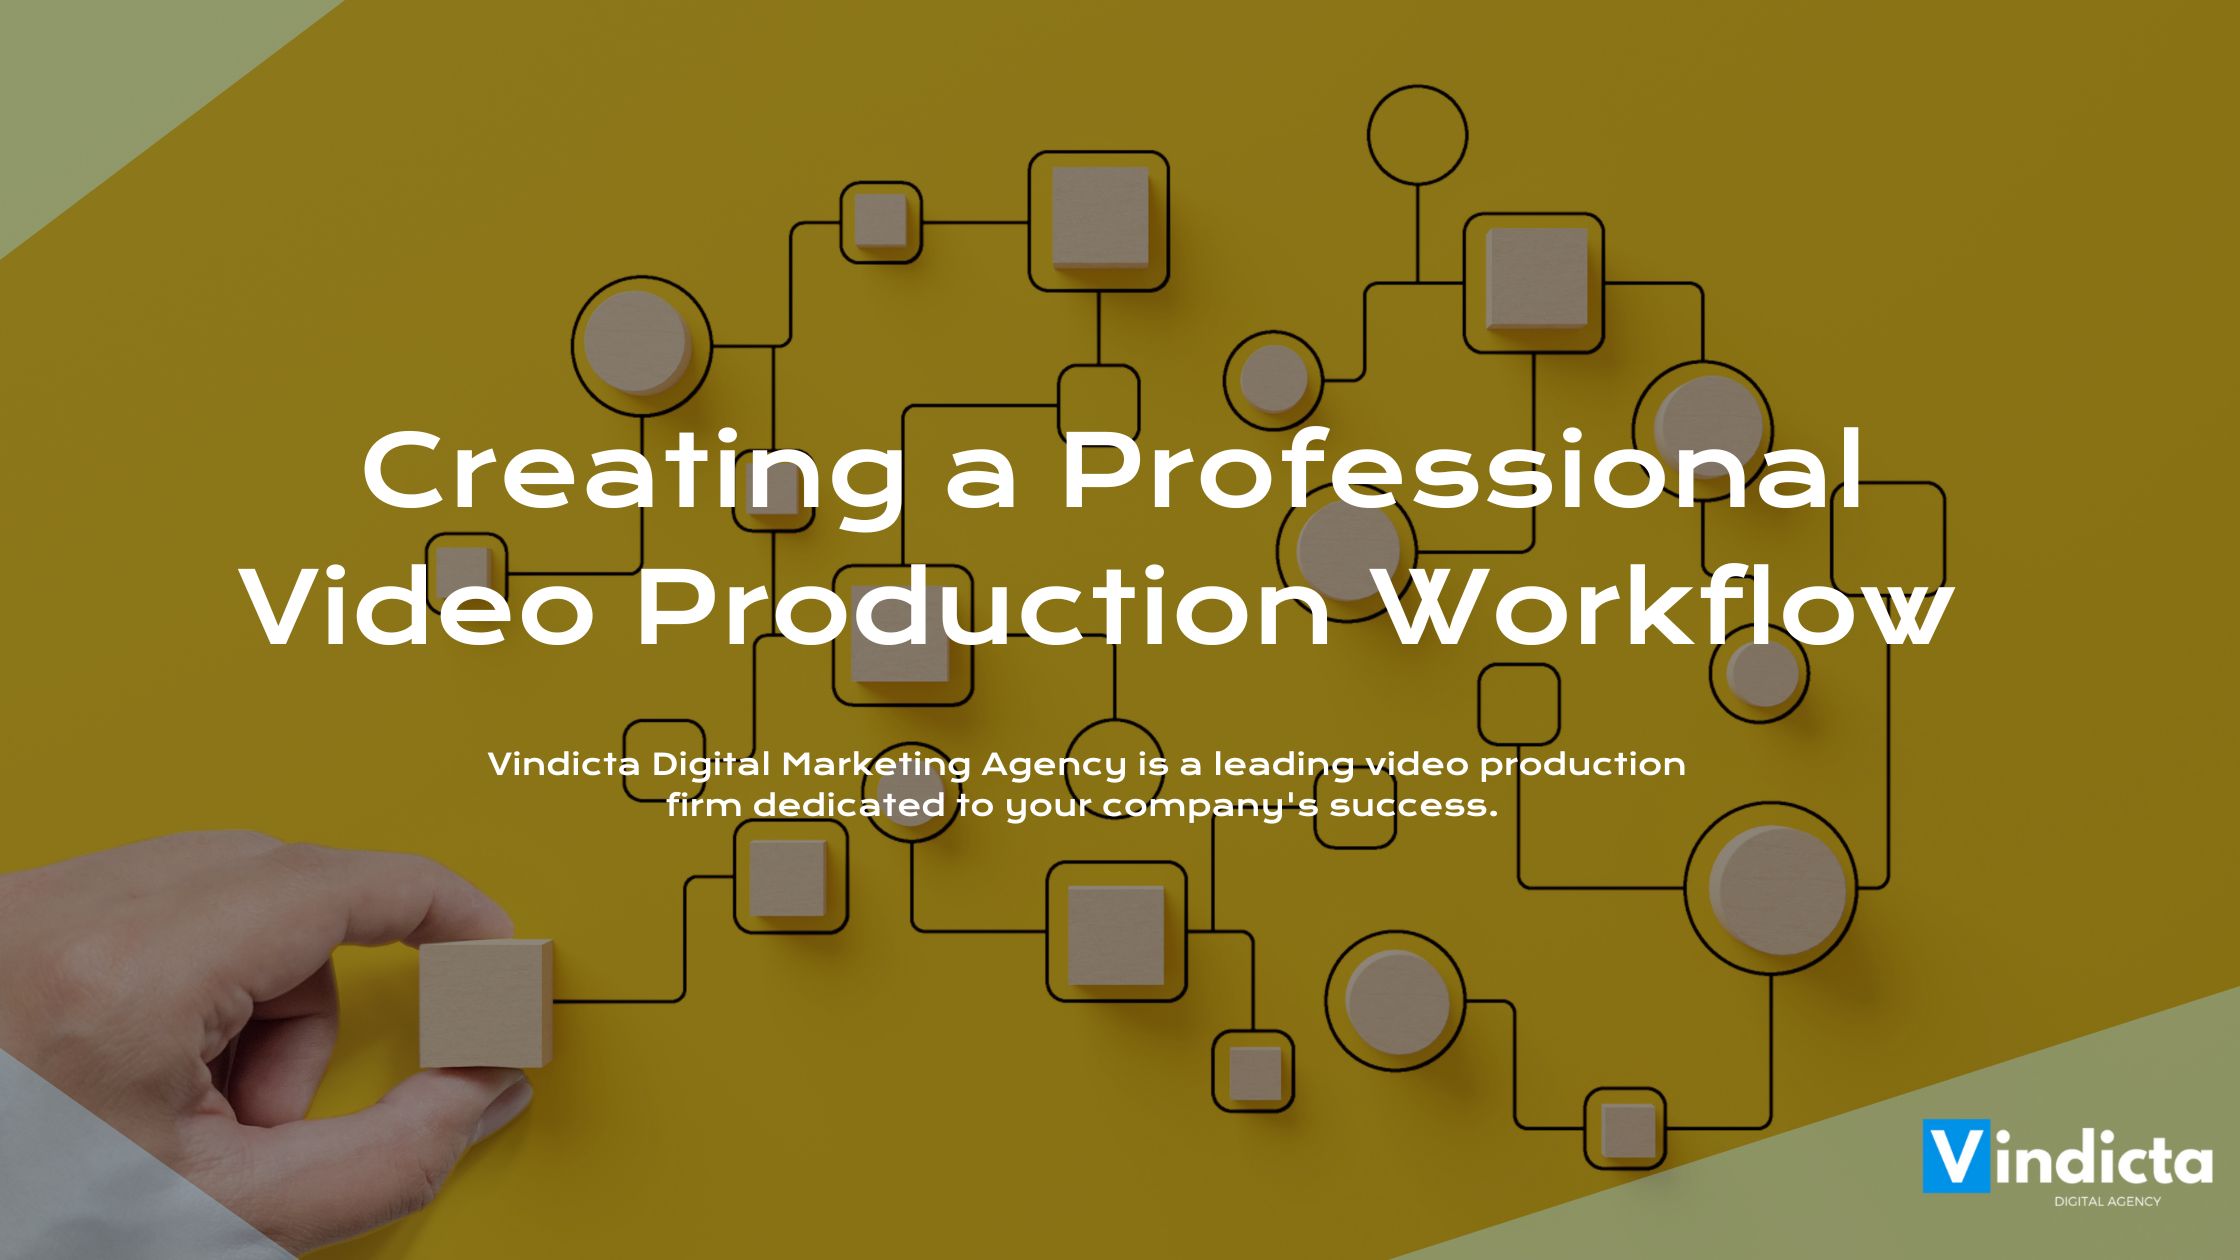 Creating a Professional Video Production Workflow for Your Business